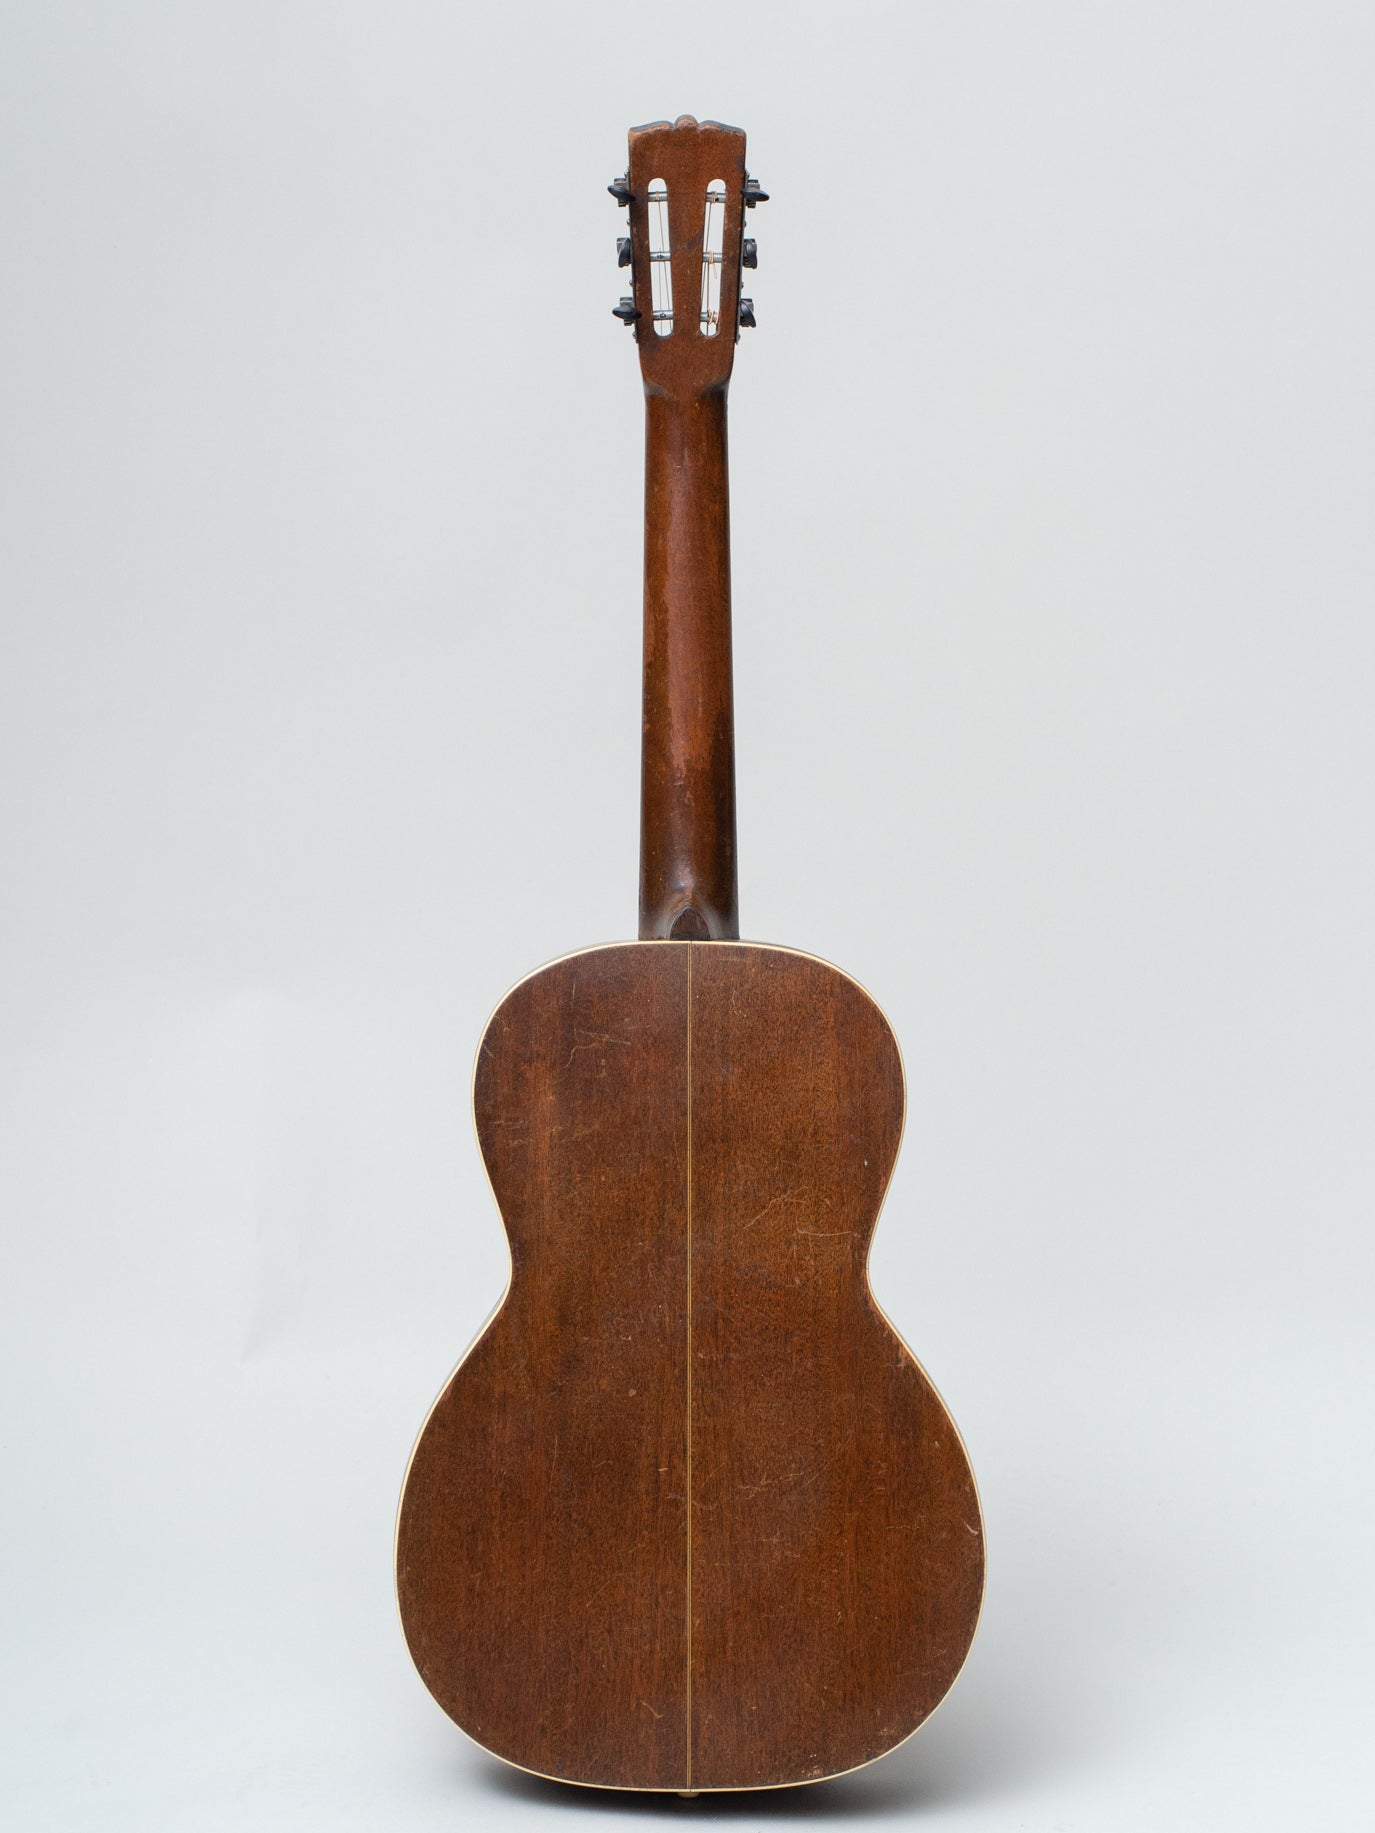 C. 1935 Washburn 5201 signed by Stepin Fetchit